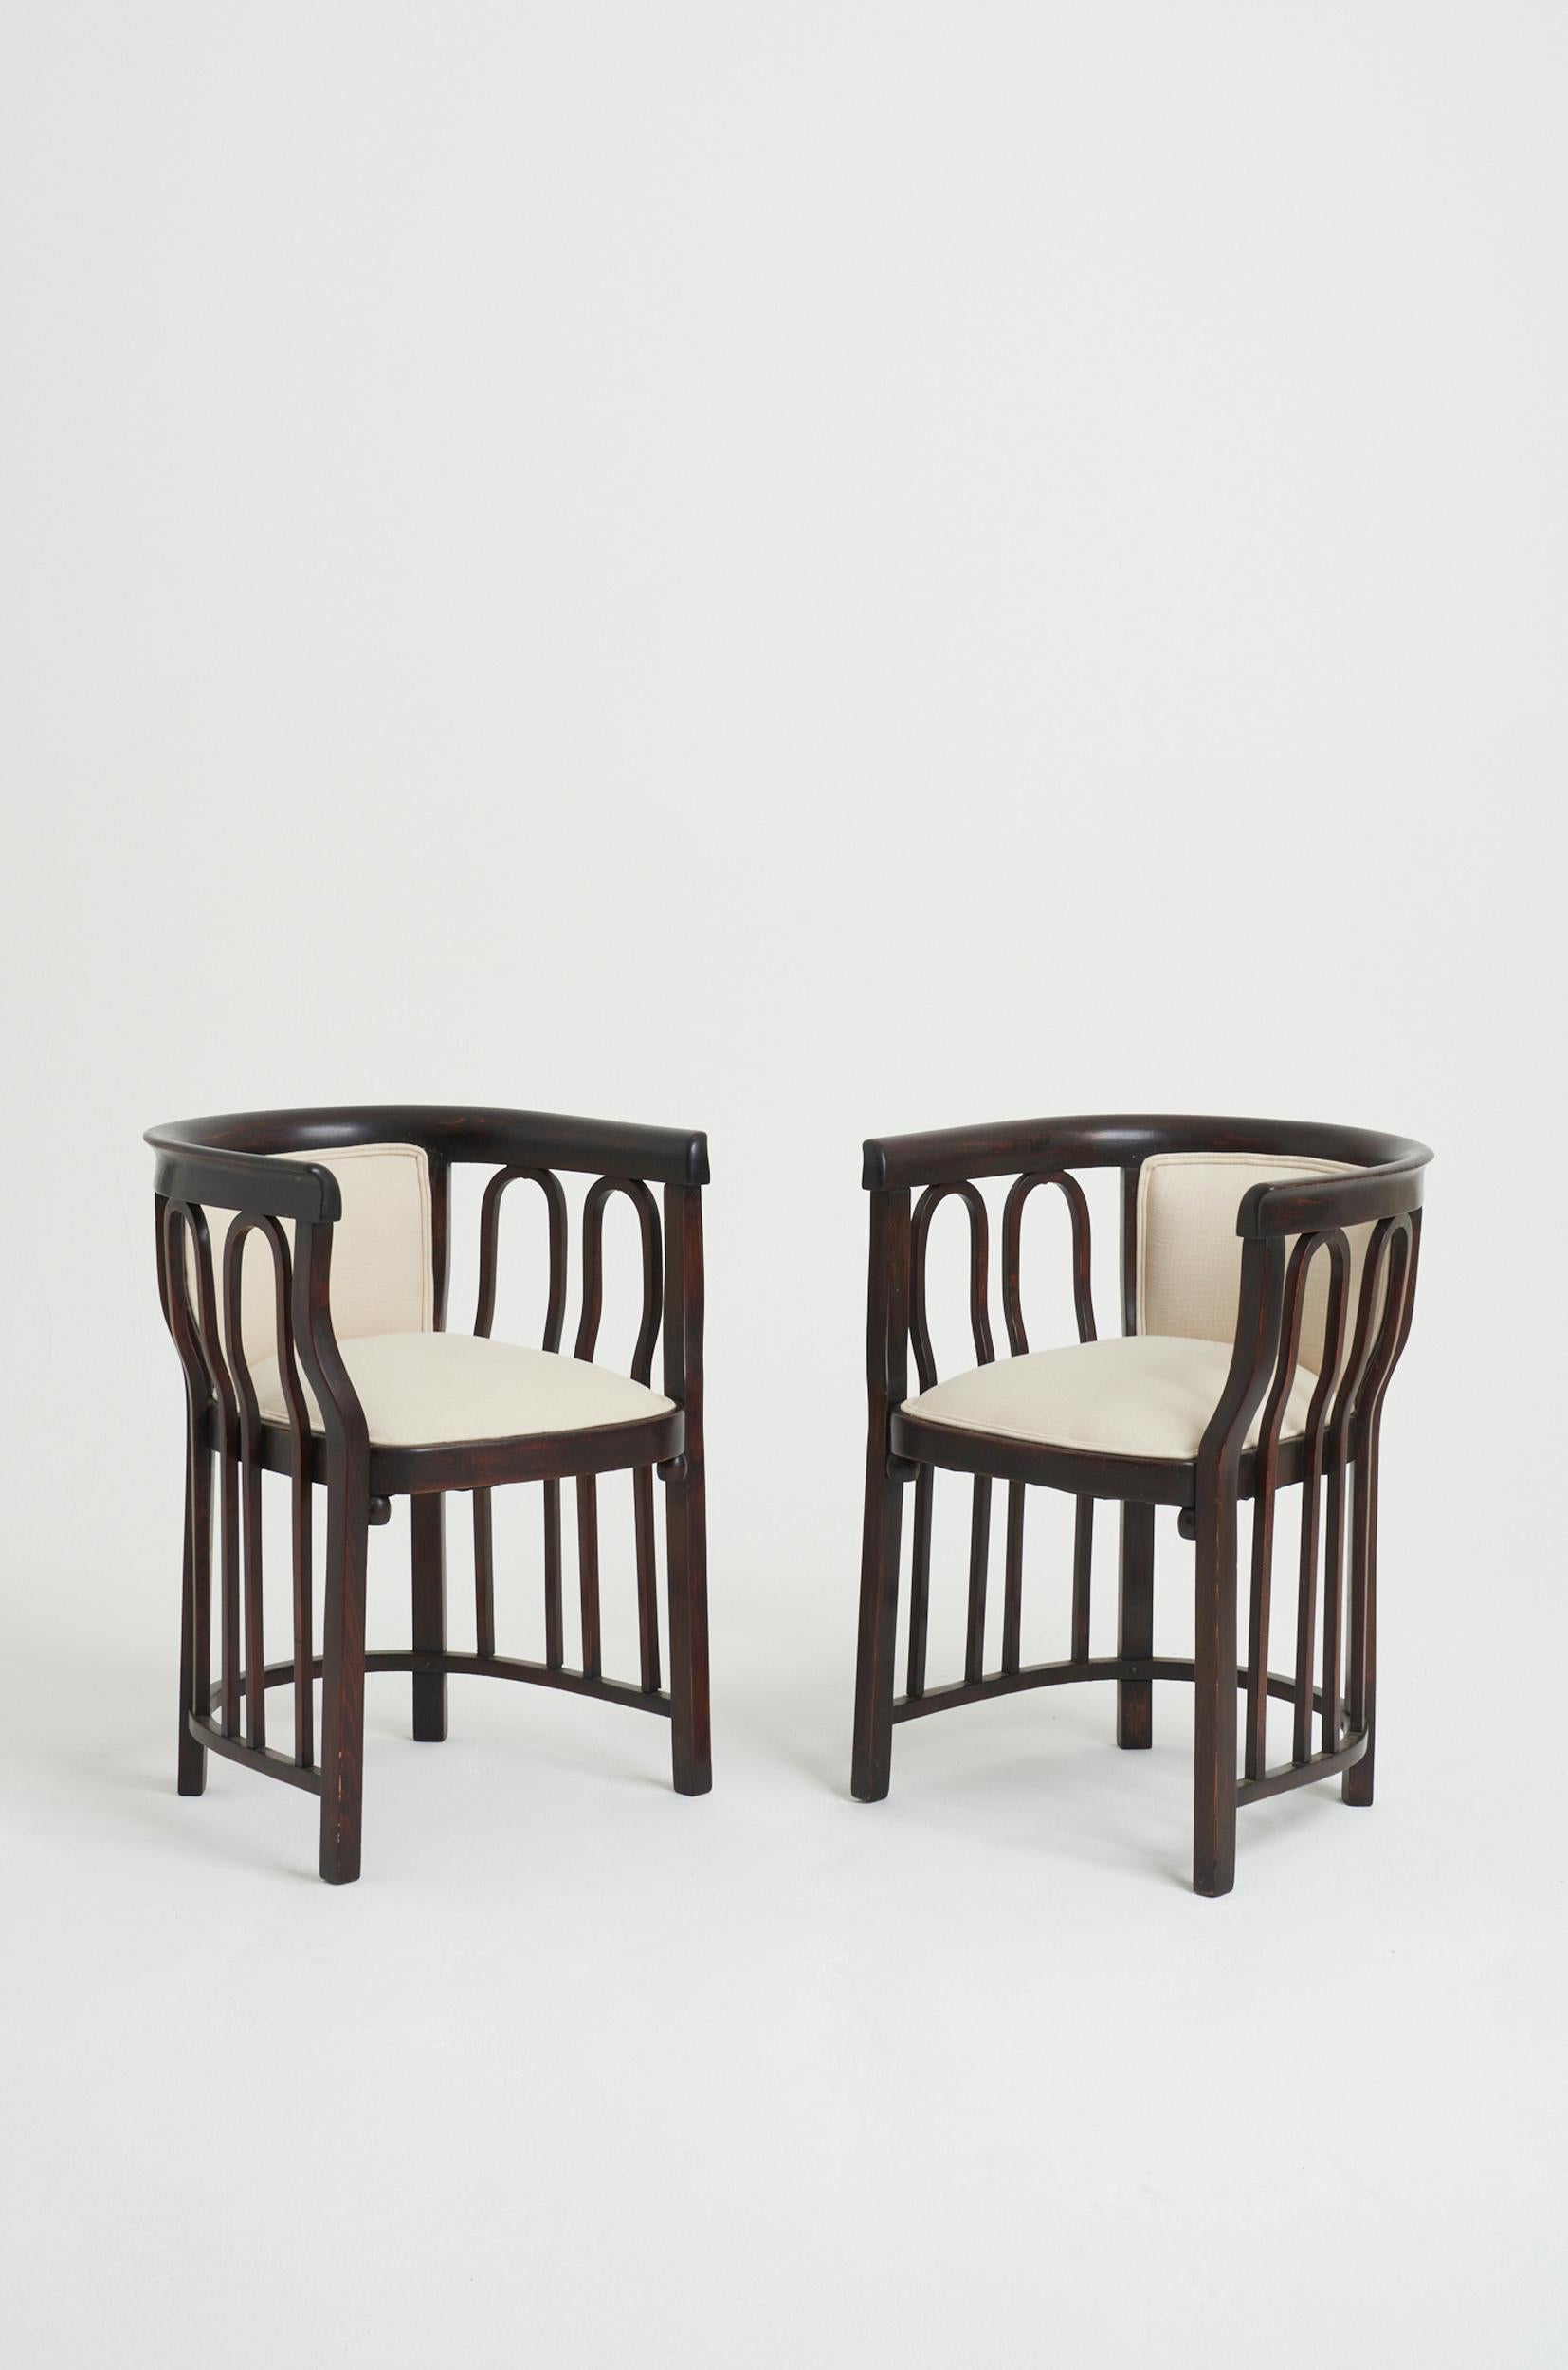 A pair of Vienna Secession armchairs
Austria, early 20th Century
75.5 cm high by 58 cm wide by 57 cm depth, seat height 47 cm